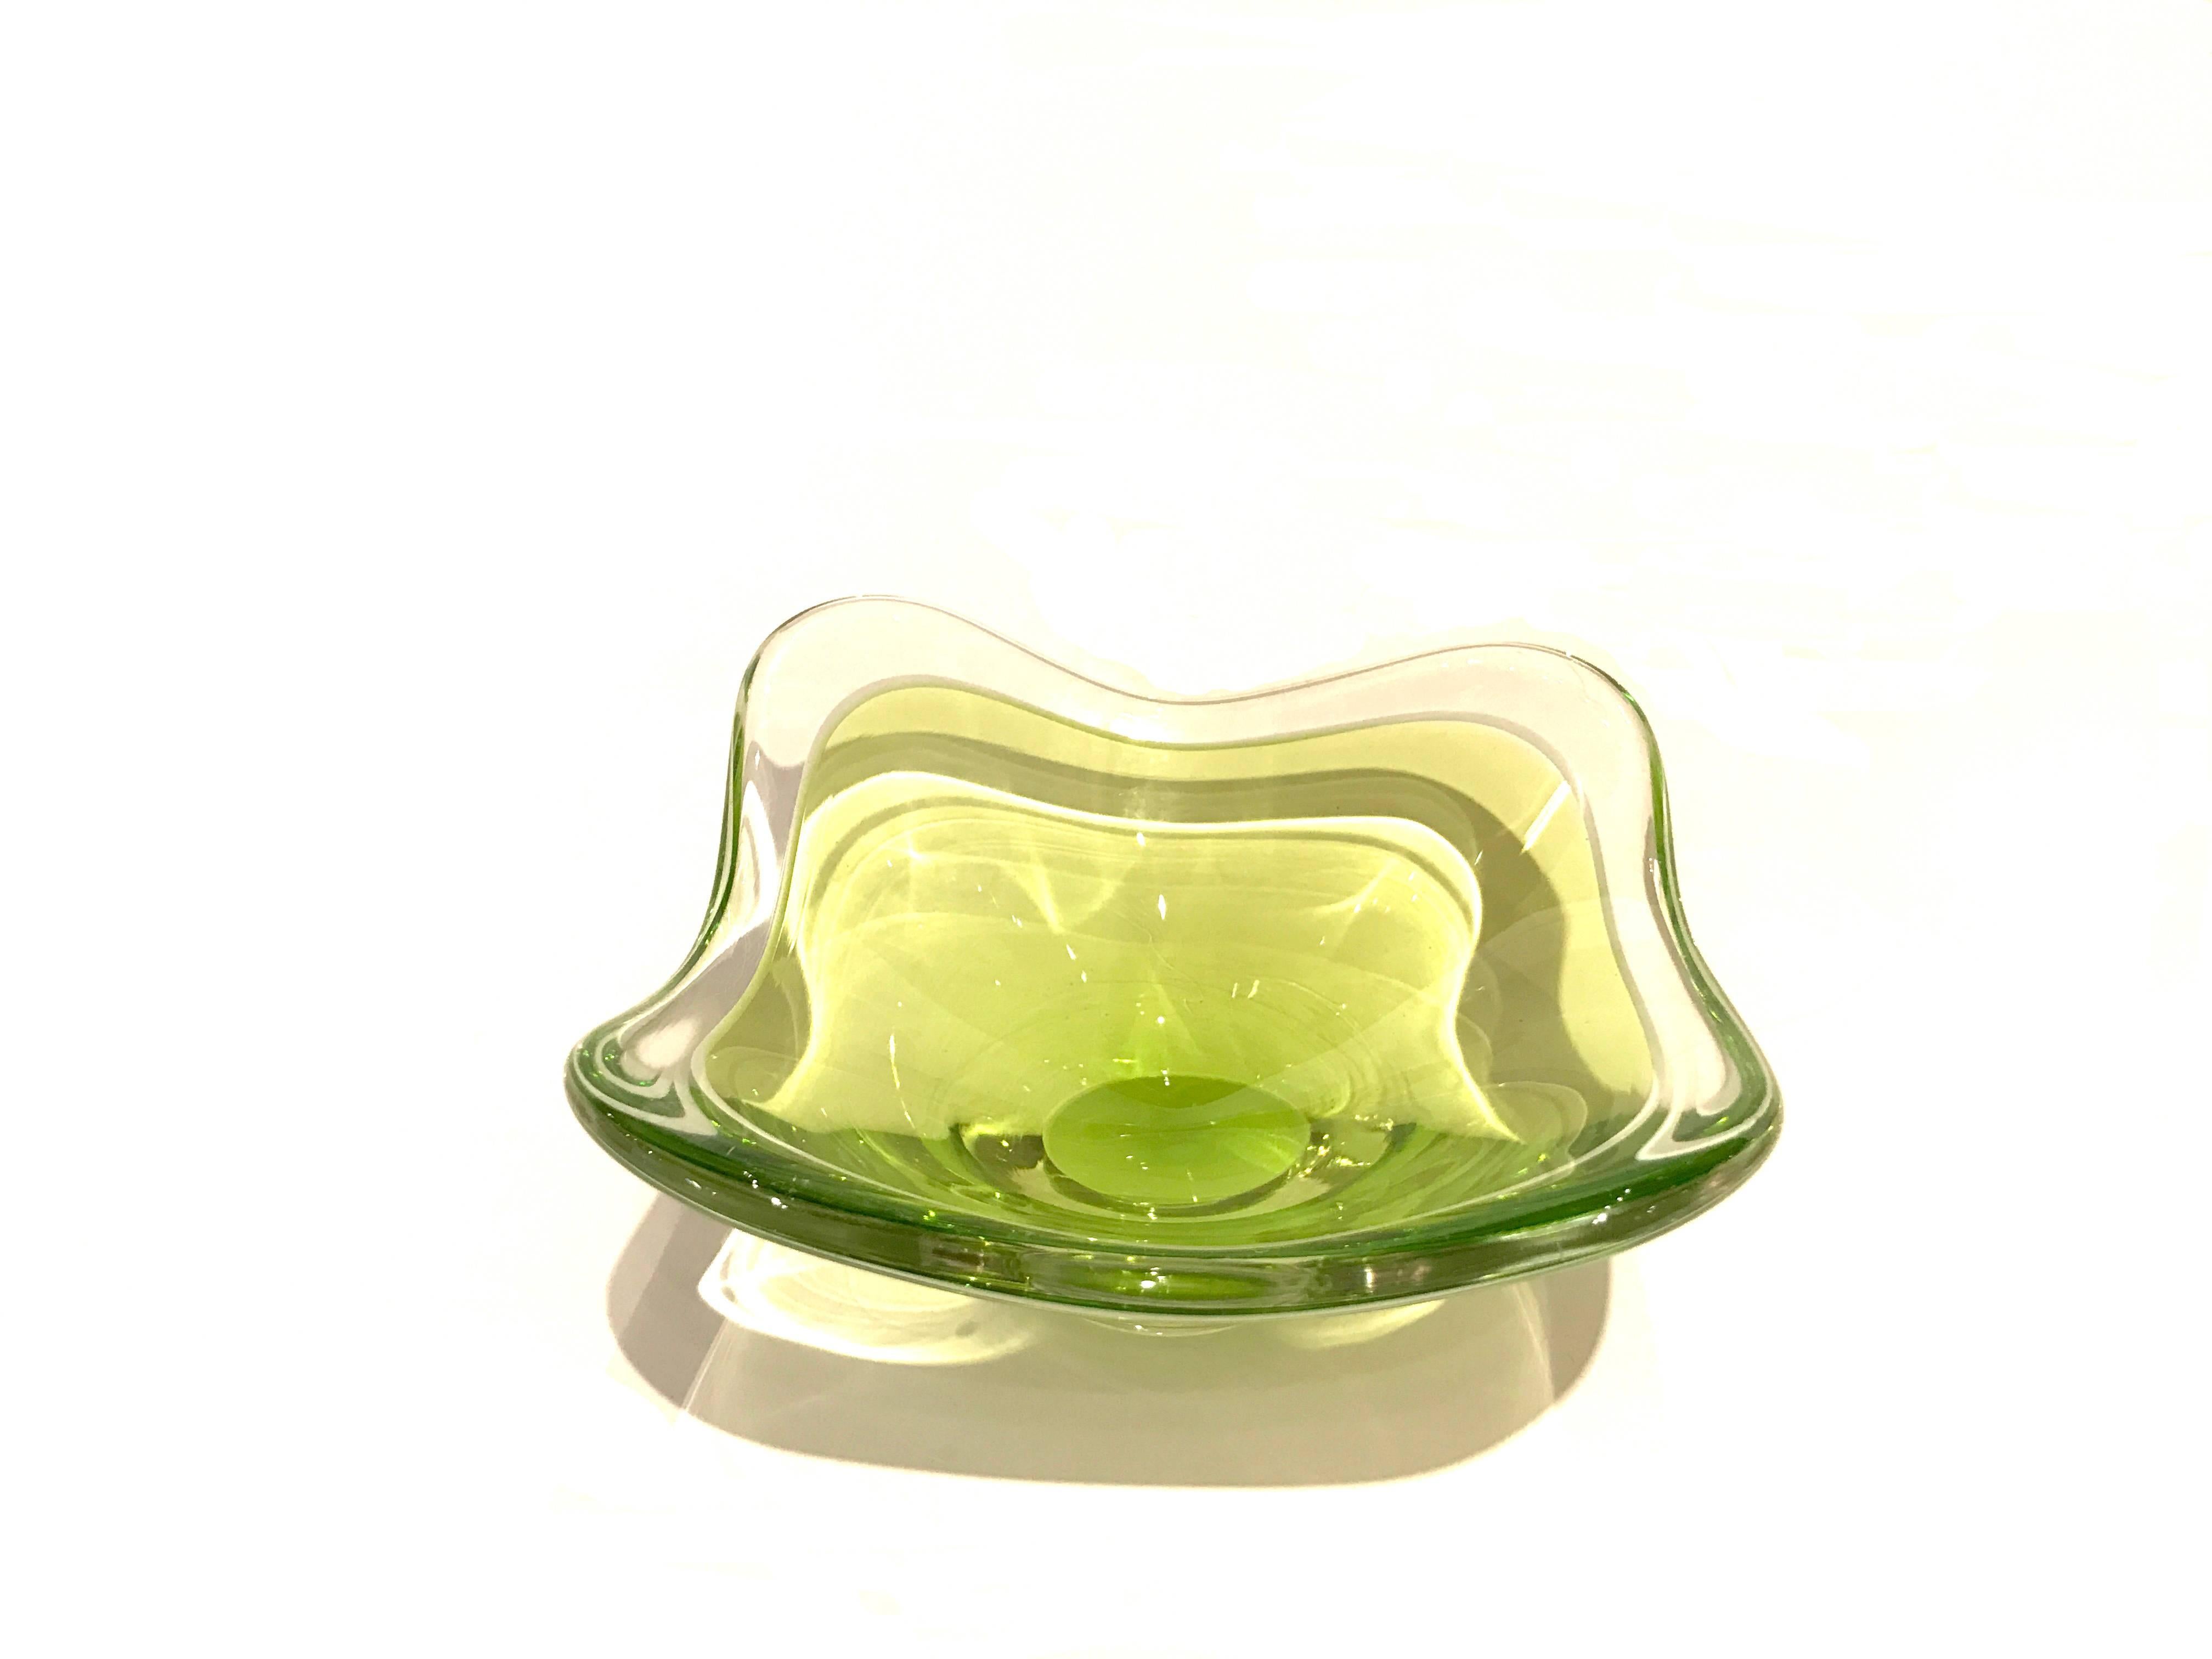 Art Glass Two Matching Glass Bowls by Paul Kedelv for Flygsfors, 1955 For Sale